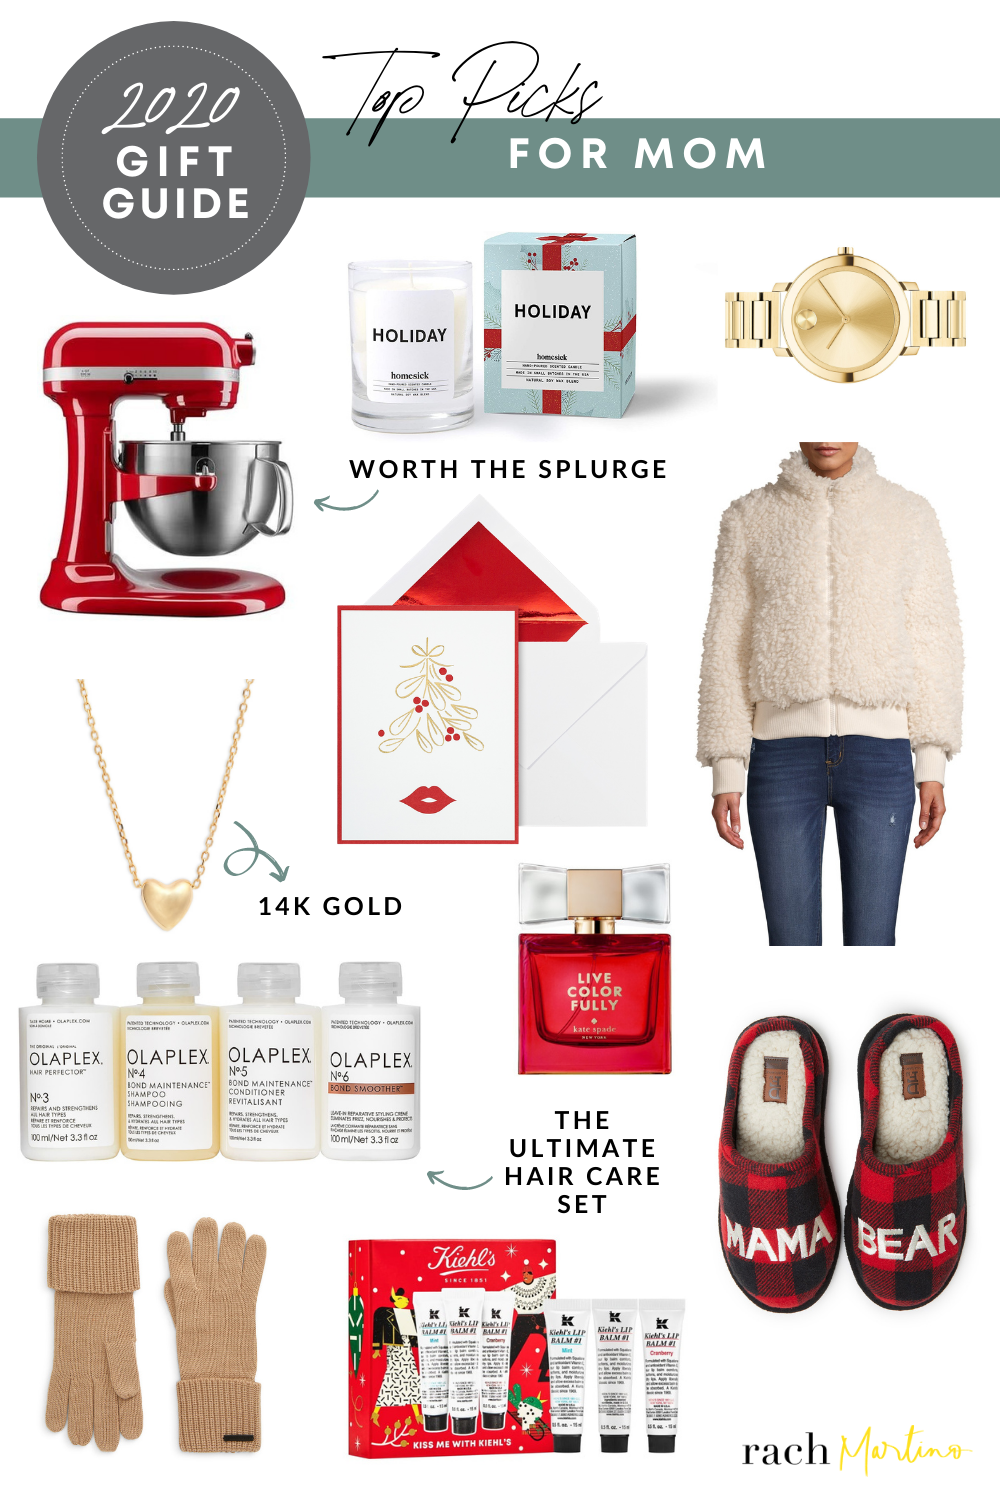 2020 Gift Guide Top Gifts for Her